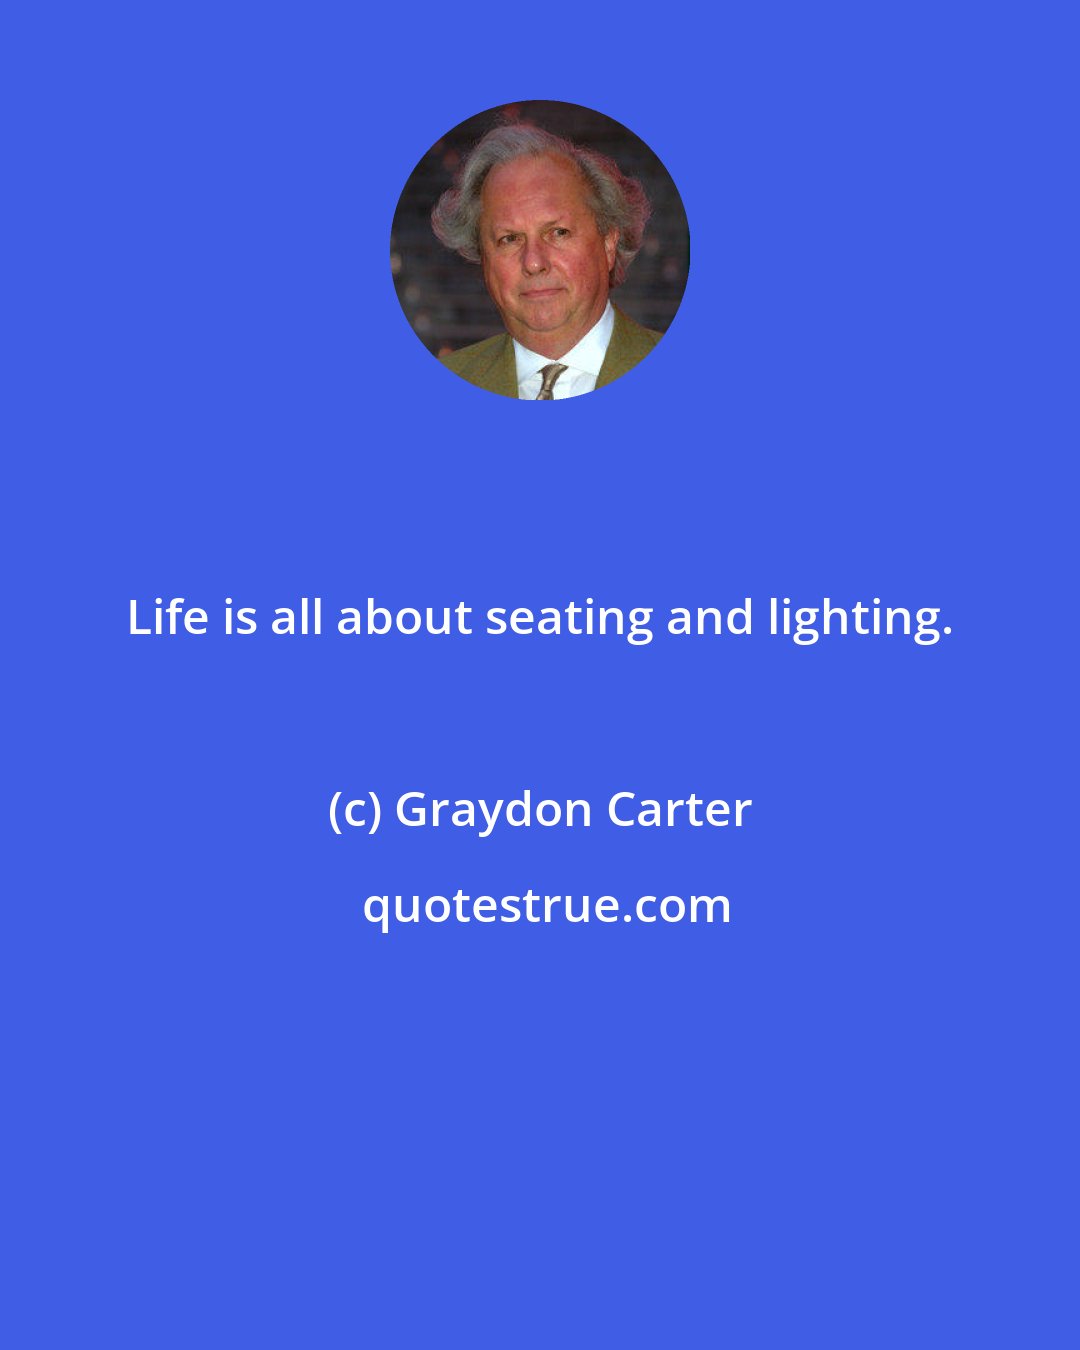 Graydon Carter: Life is all about seating and lighting.